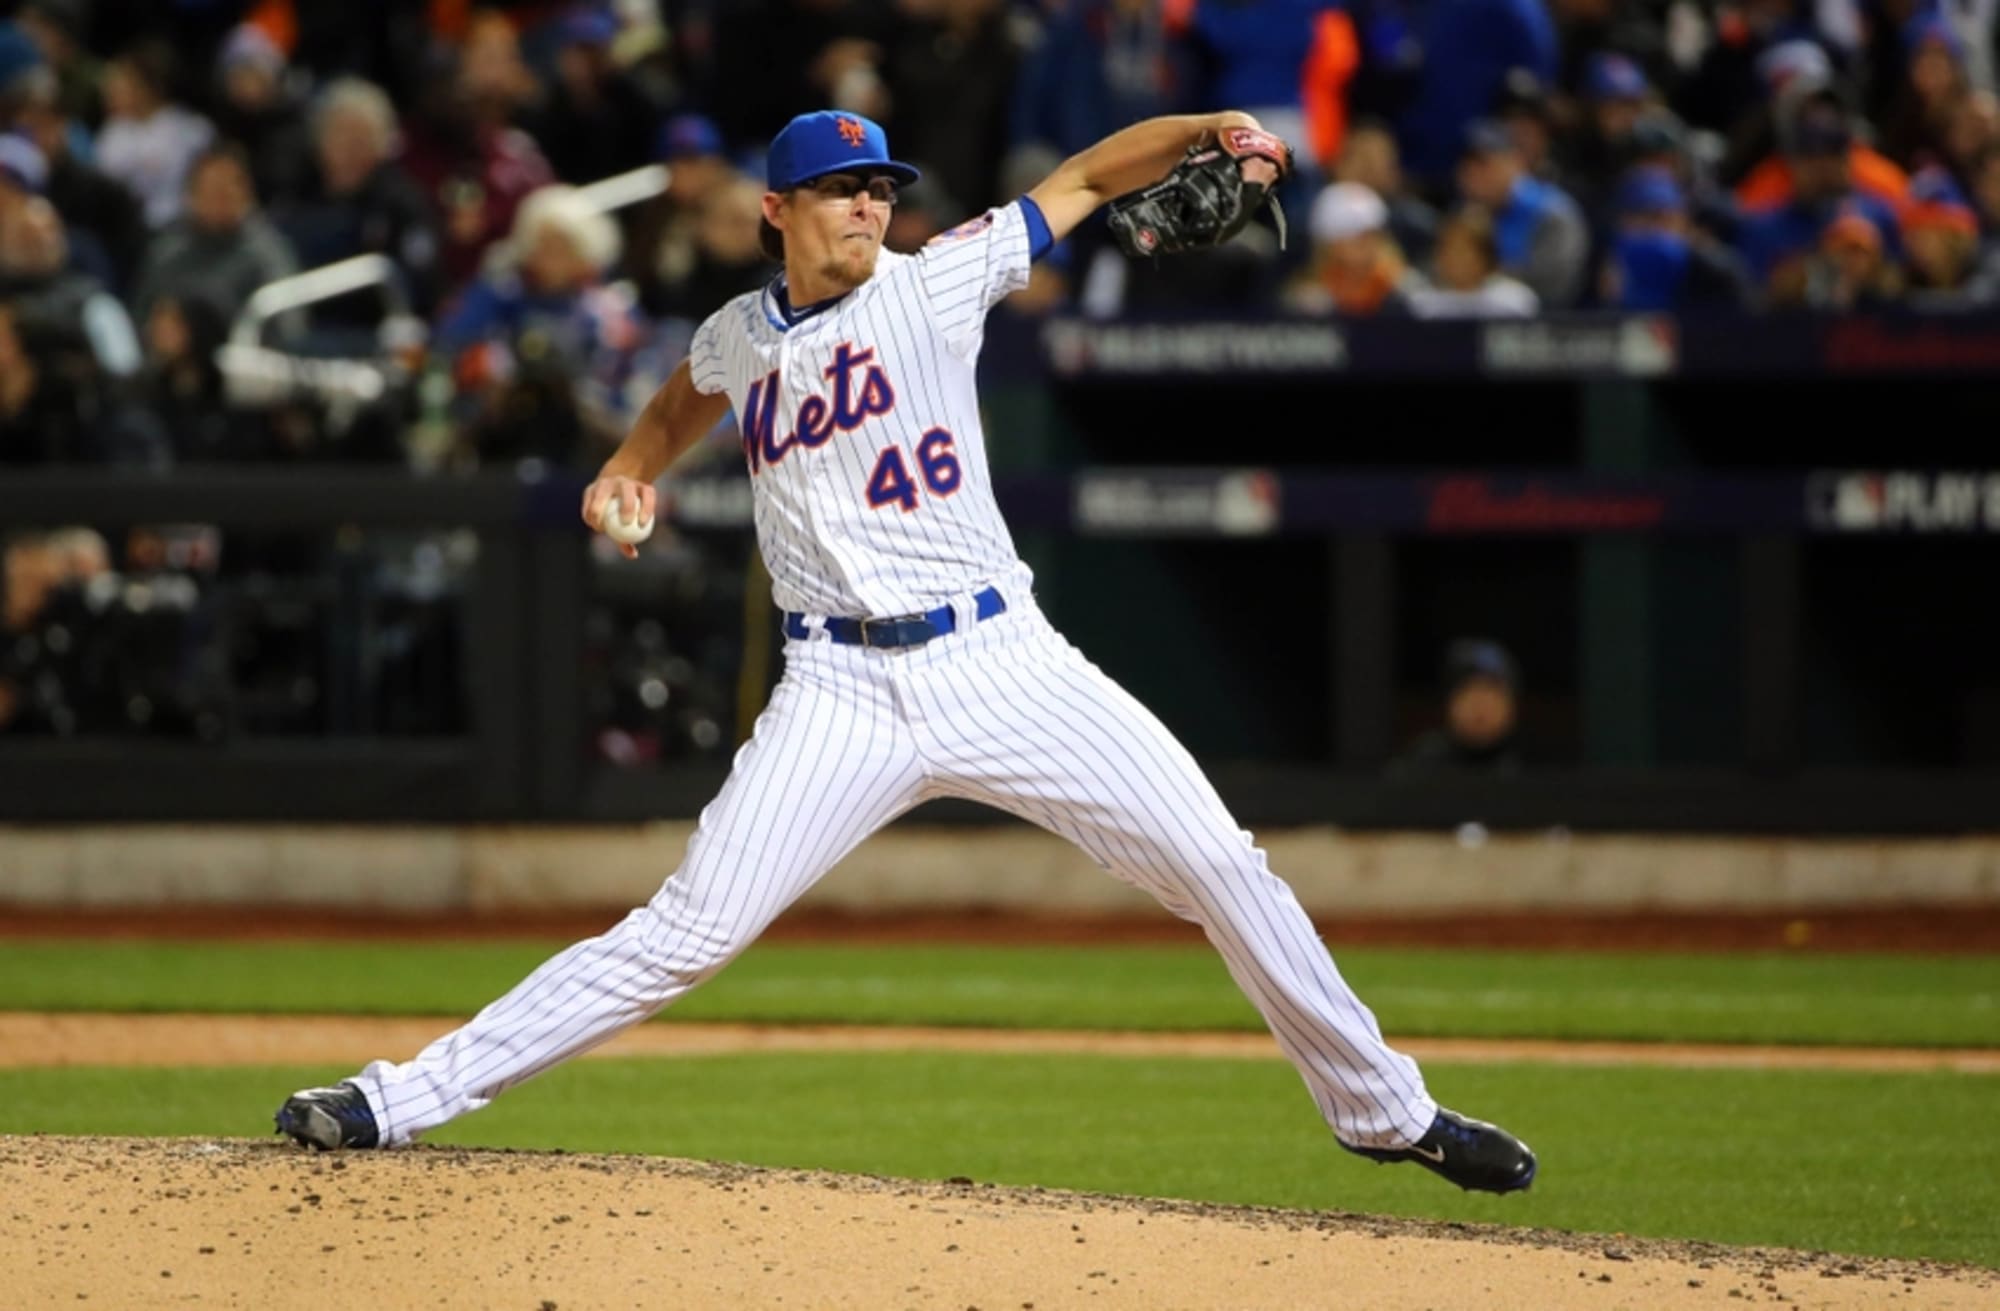 Mets acquire lefty relievers, Torres and Blevins